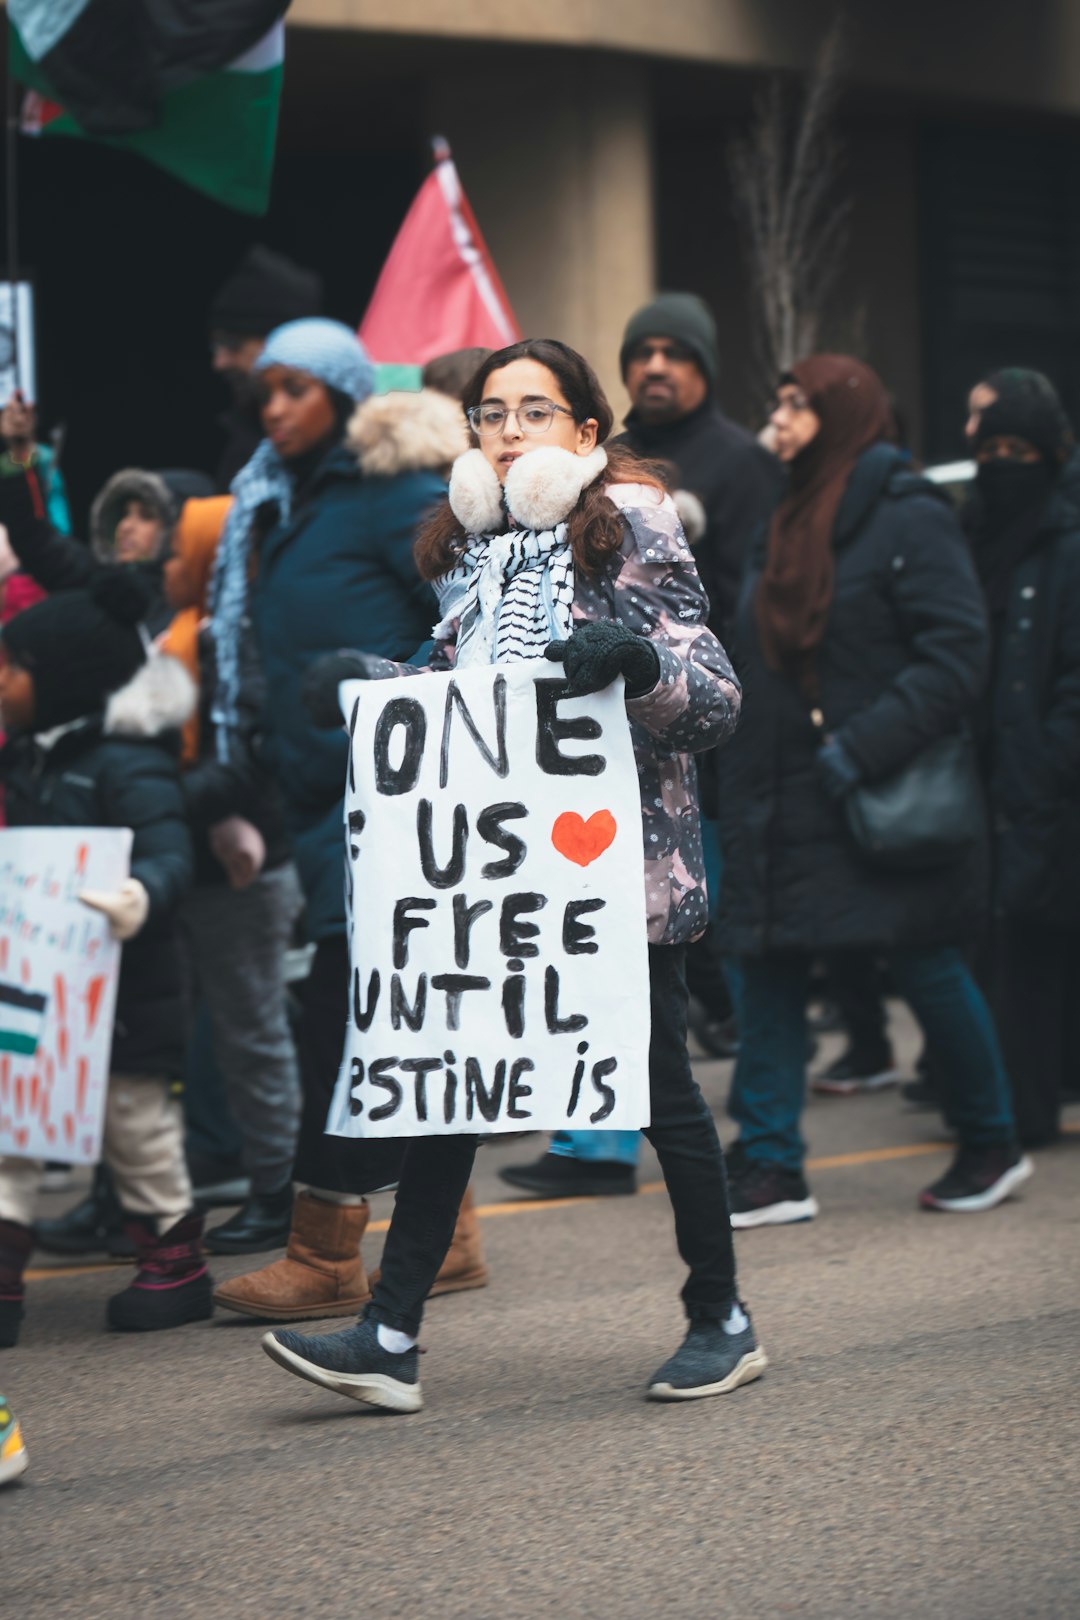 a woman holding a sign that says one us free until stine is